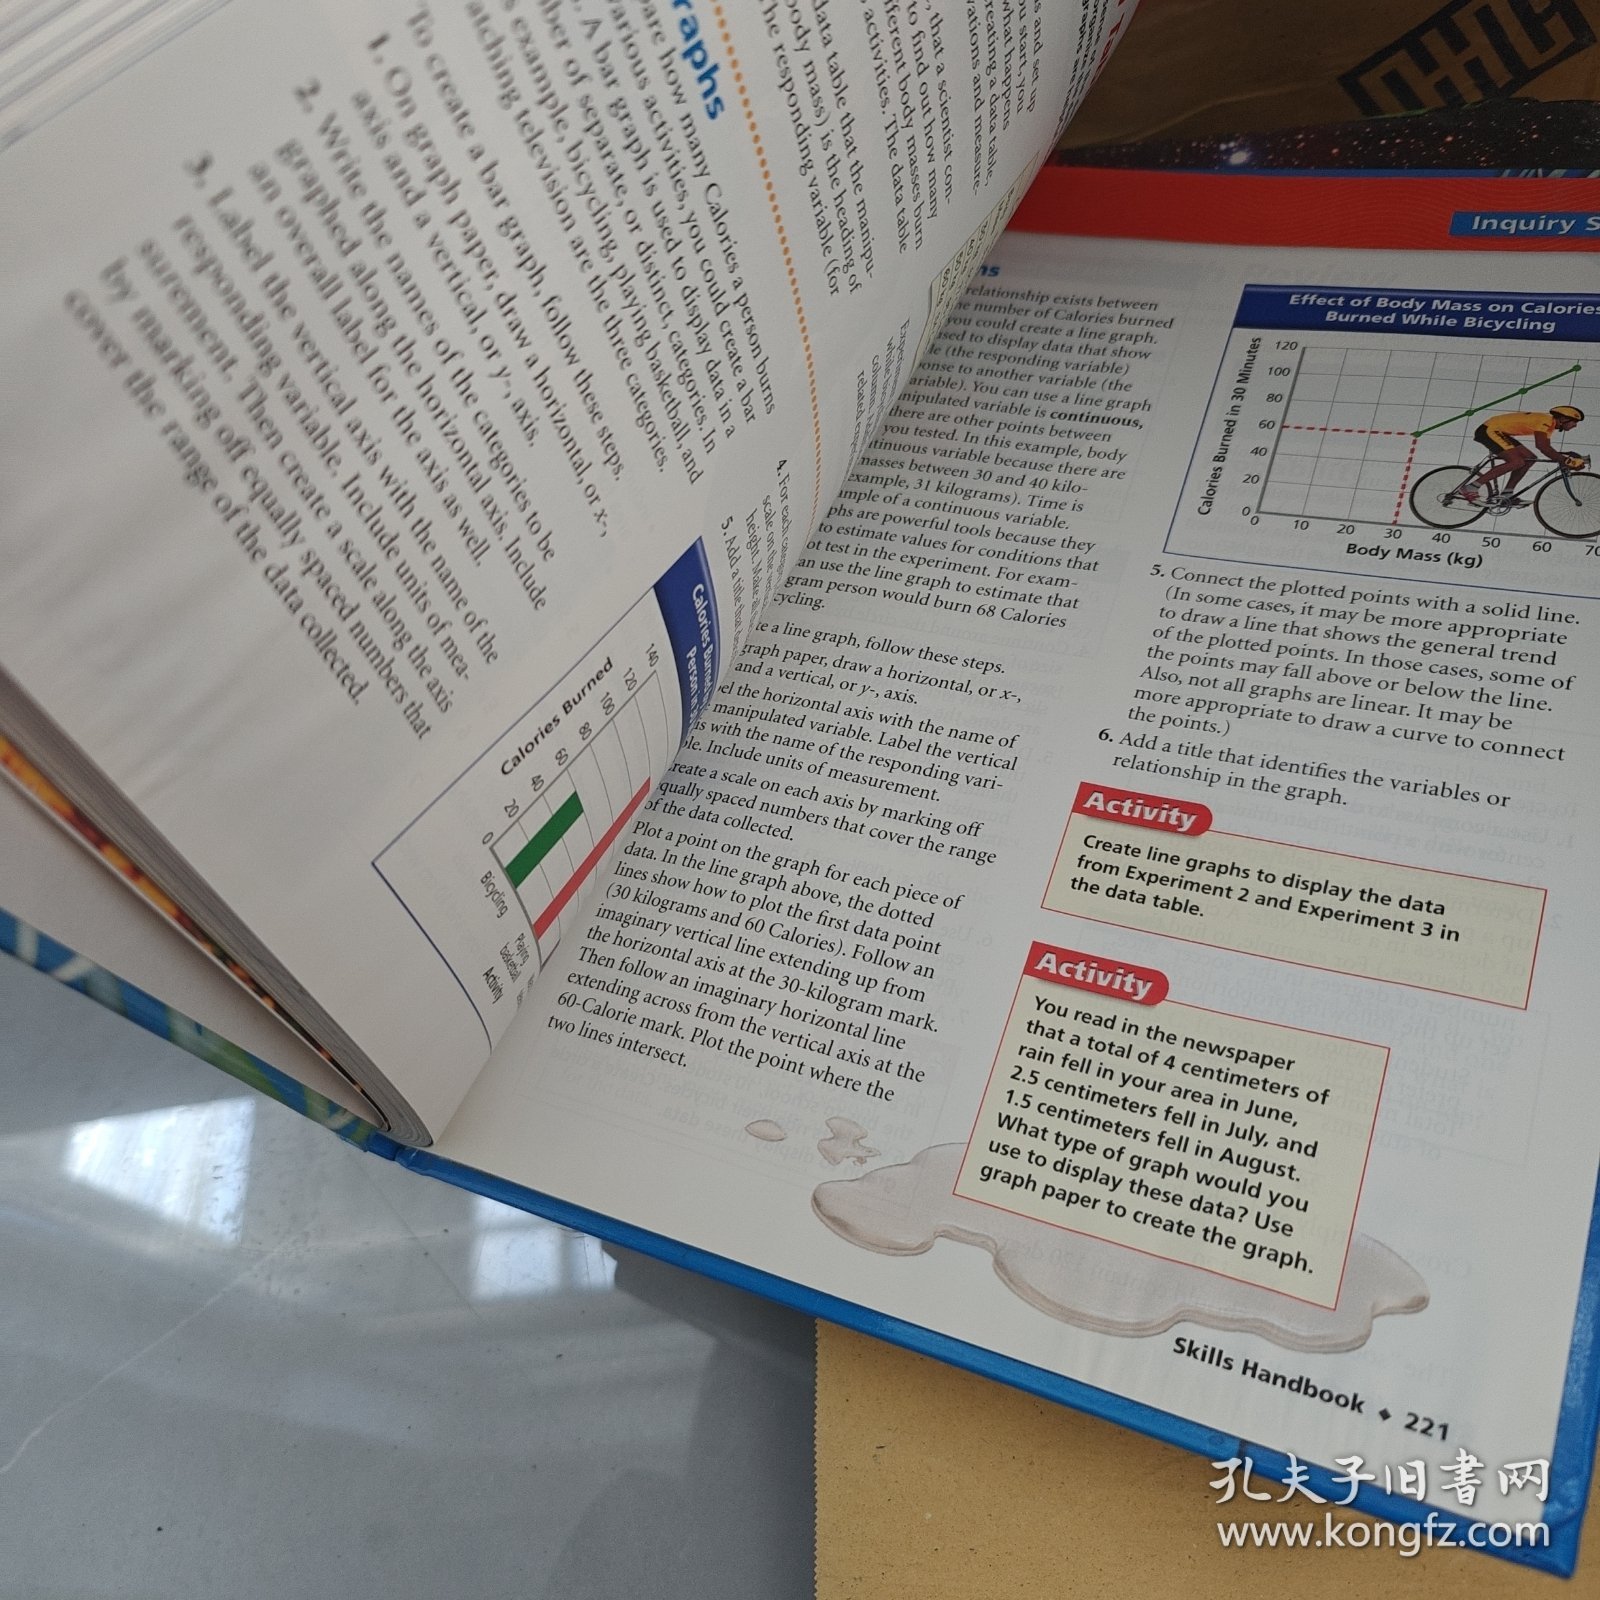 Motion, Forces, and Energy PRENTICE HALL Science Explorer 扉页有笔记